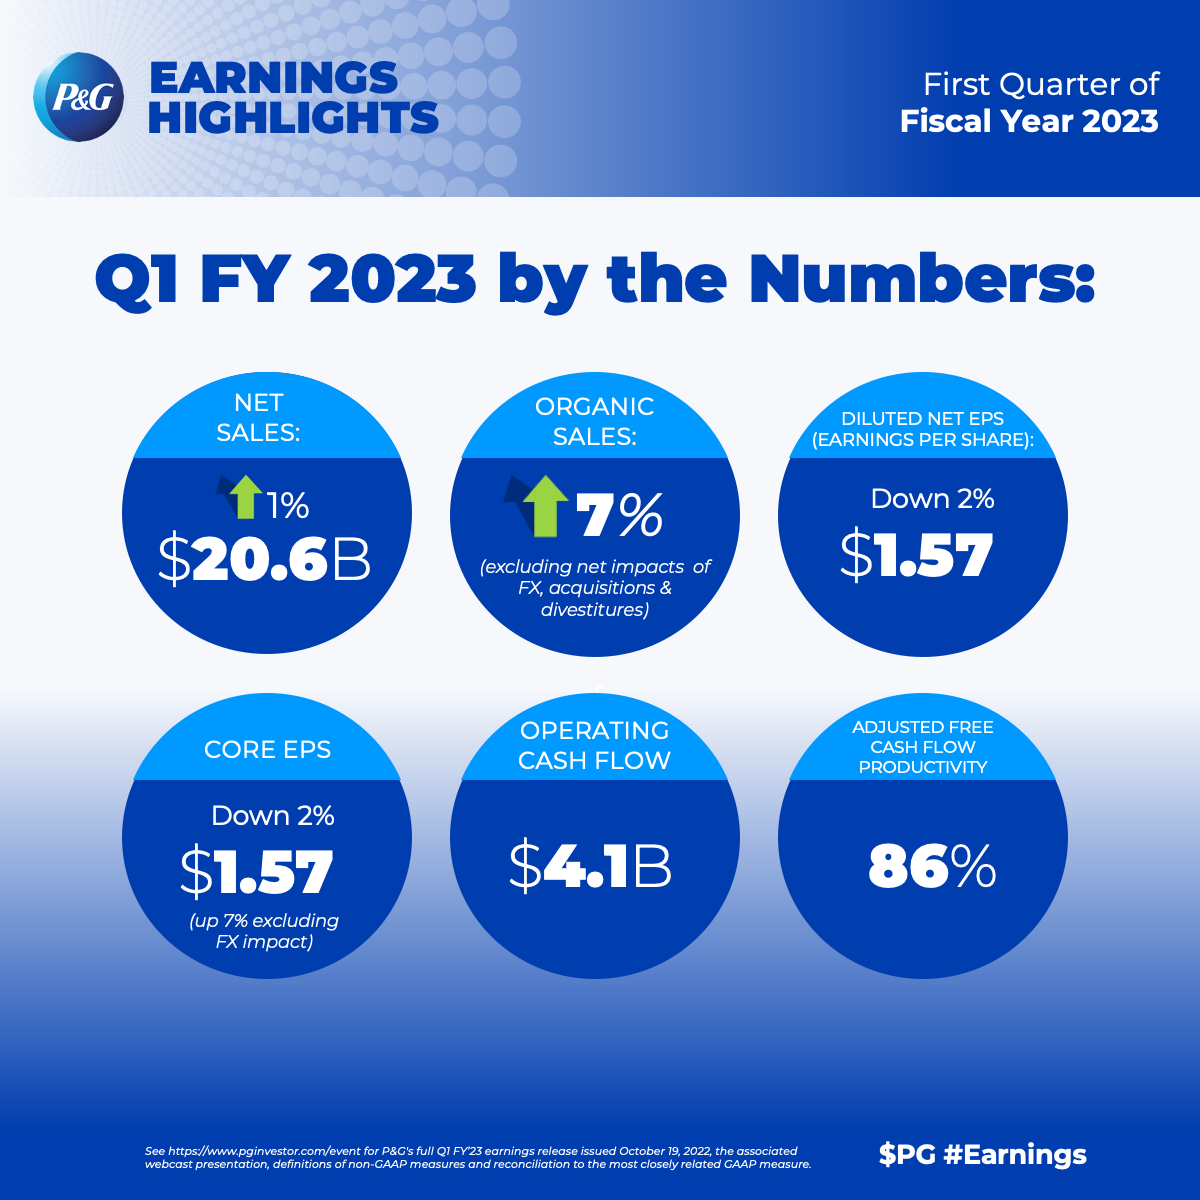 This is a one-page view of the P&G Results for First Quarter of Fiscal Year 2023